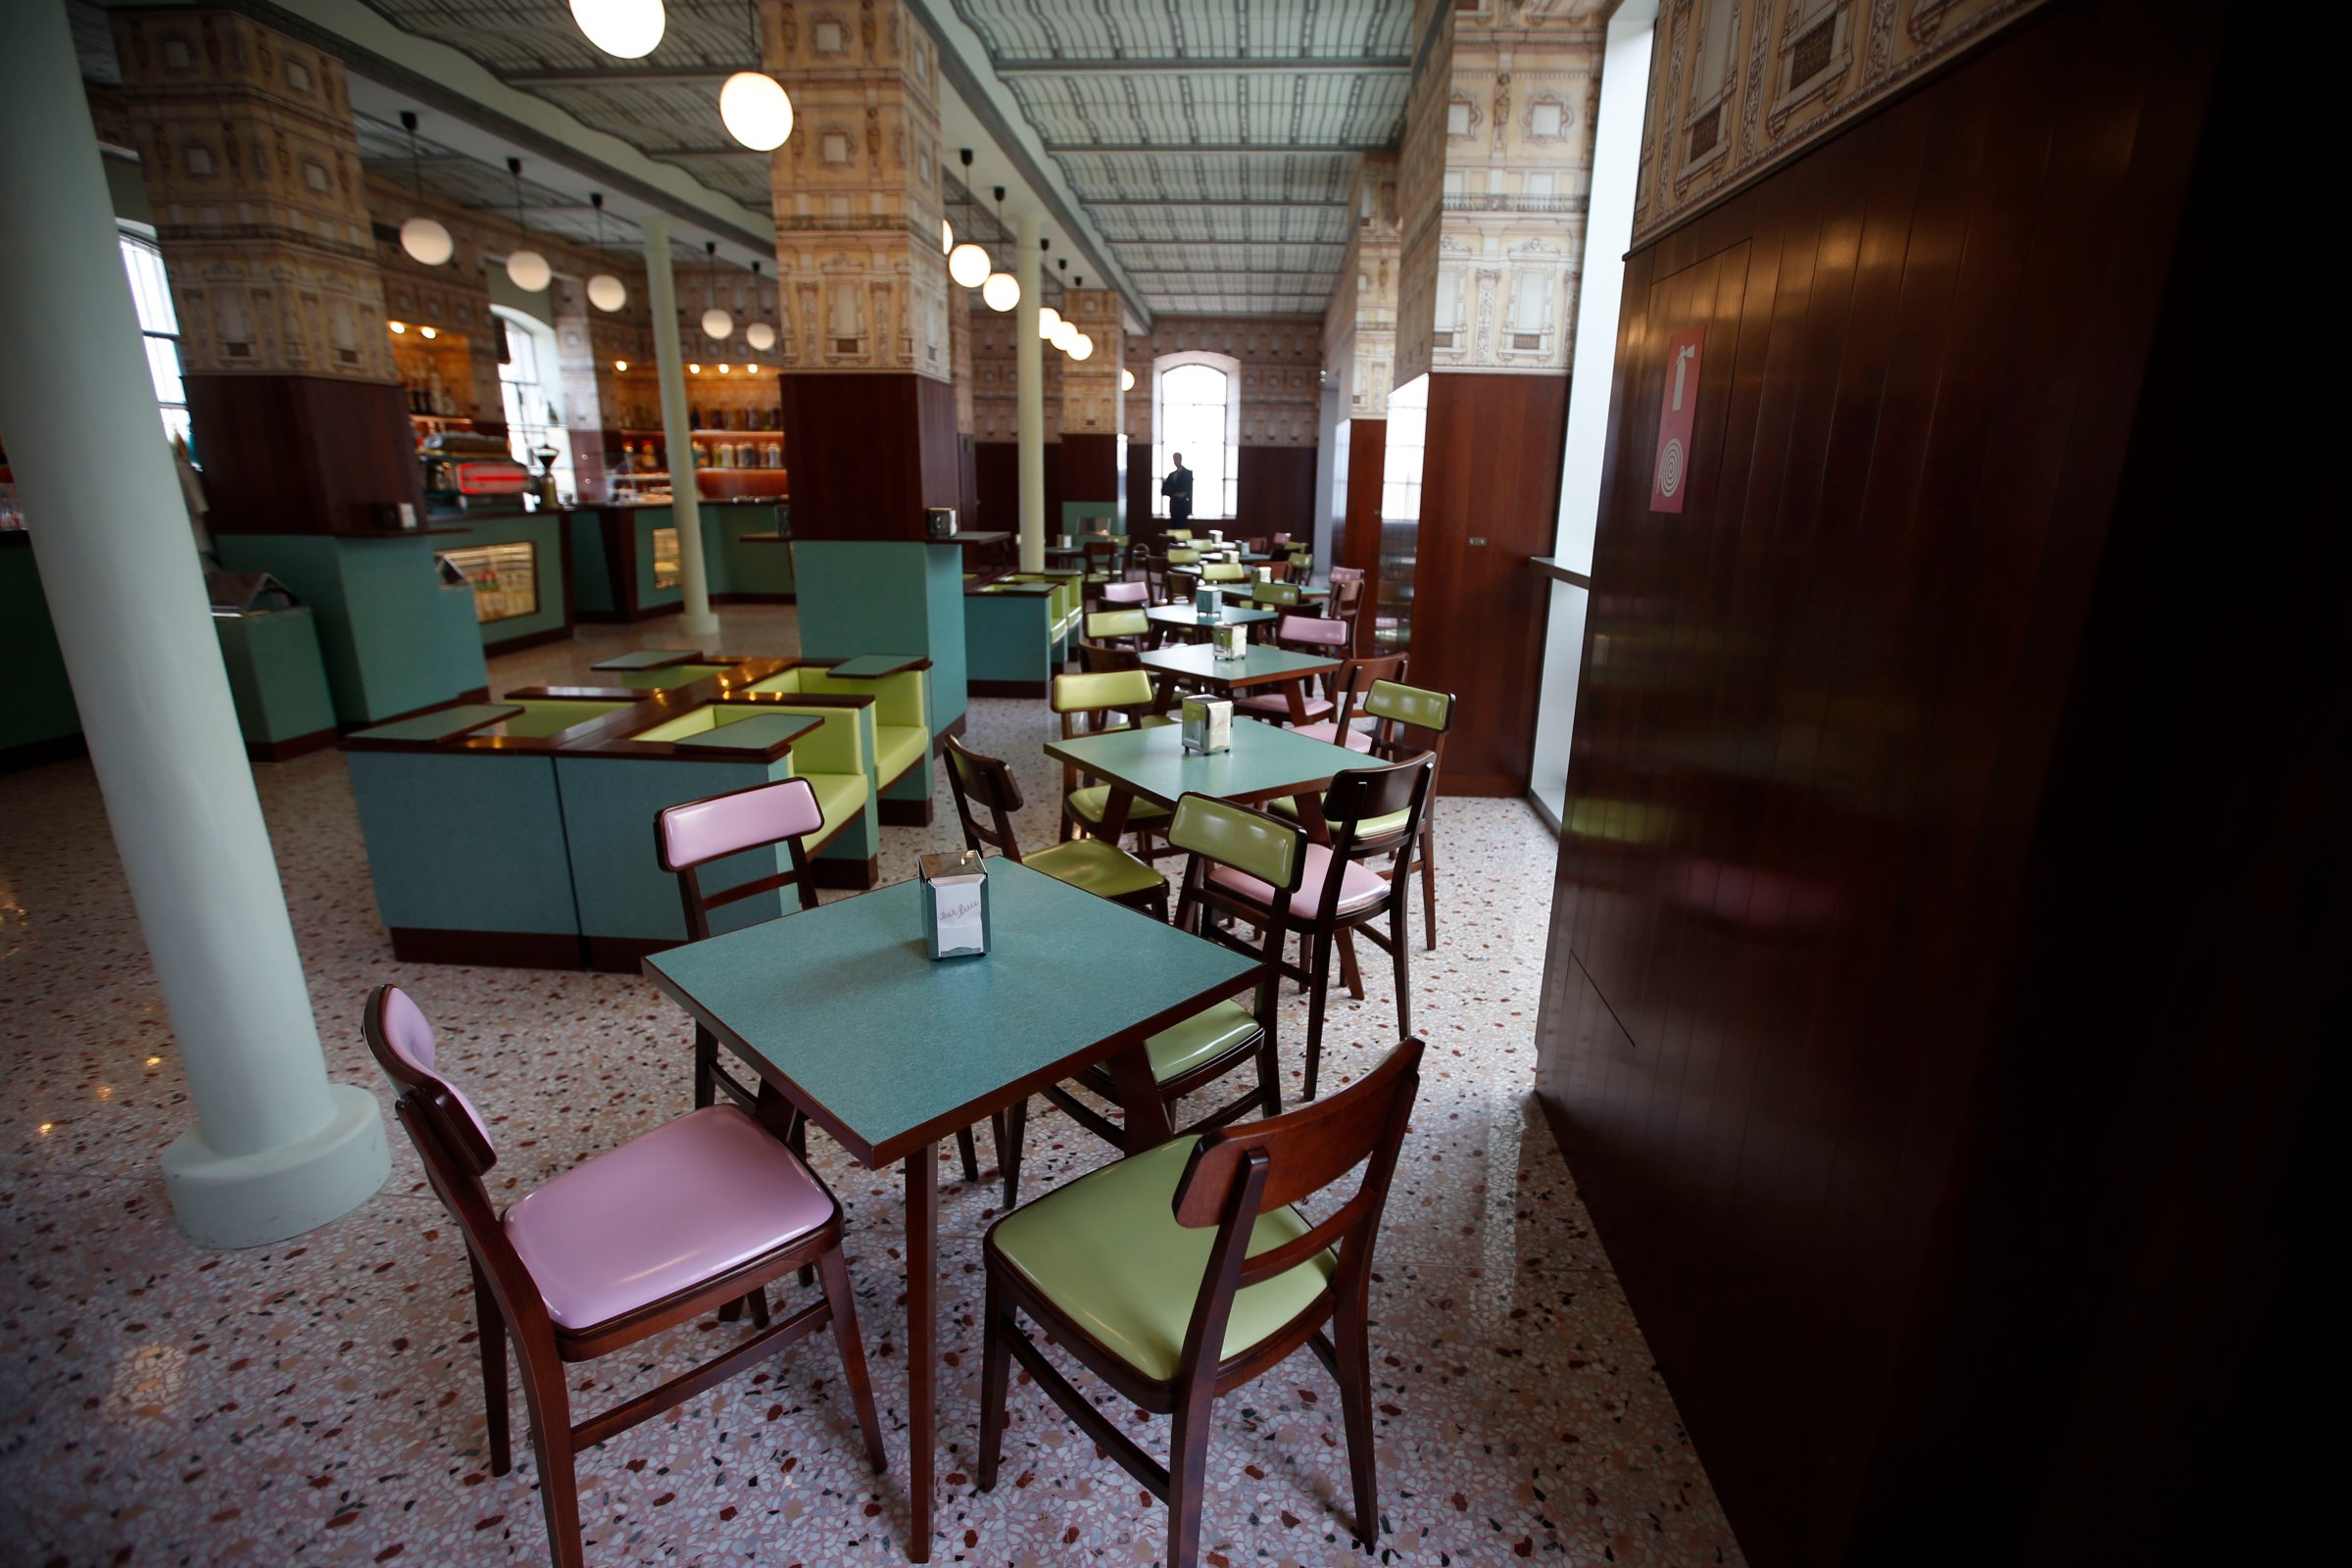 A view of the Bar Luce in Milan, Italy on May 8, 2015.